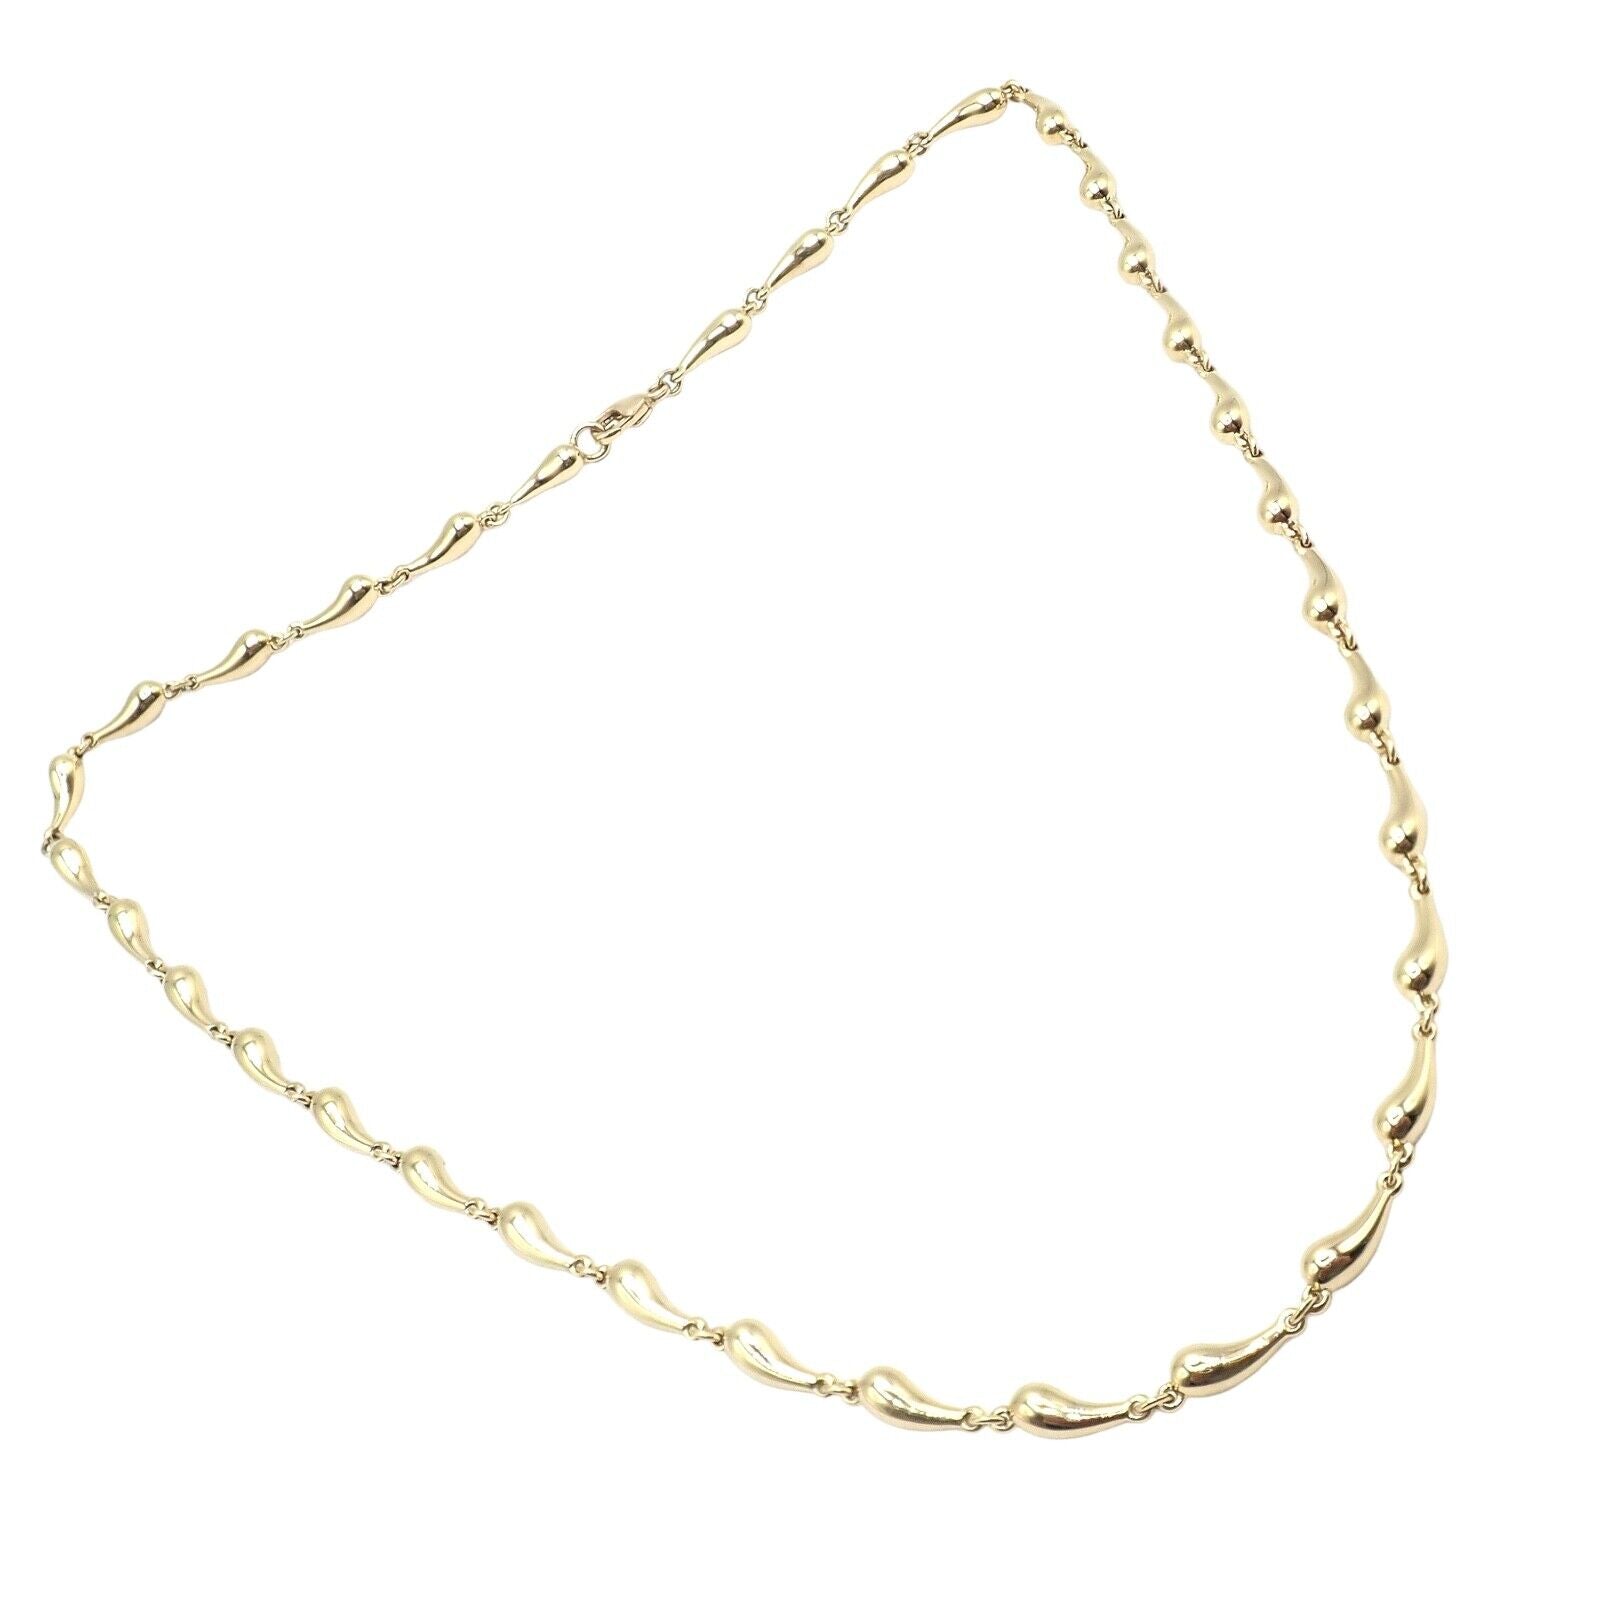 Tiffany & Co. Jewelry & Watches:Fine Jewelry:Necklaces & Pendants Authentic! Tiffany & Co Peretti 18k Yellow Gold Vintage Teardrop Necklace 15.75"